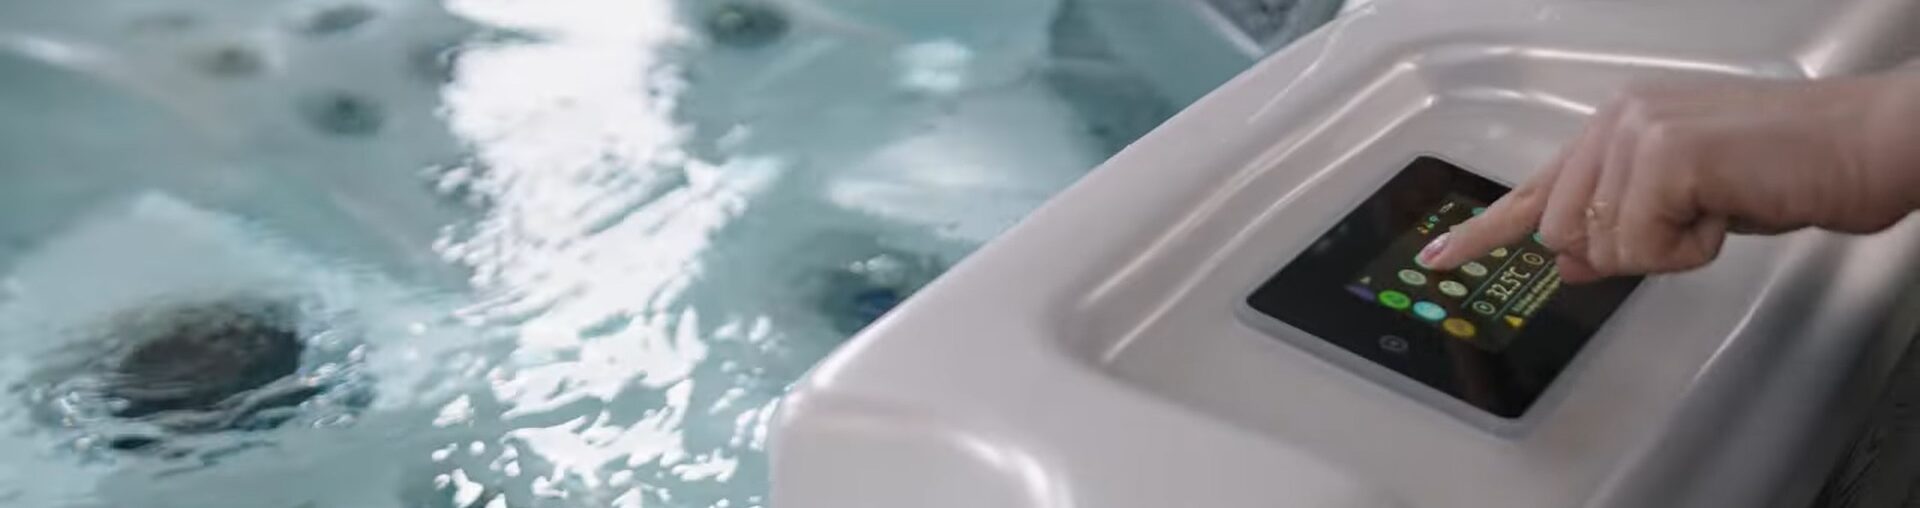 How to Work Bluetooth on a Luxury Hot Tub by Wellis